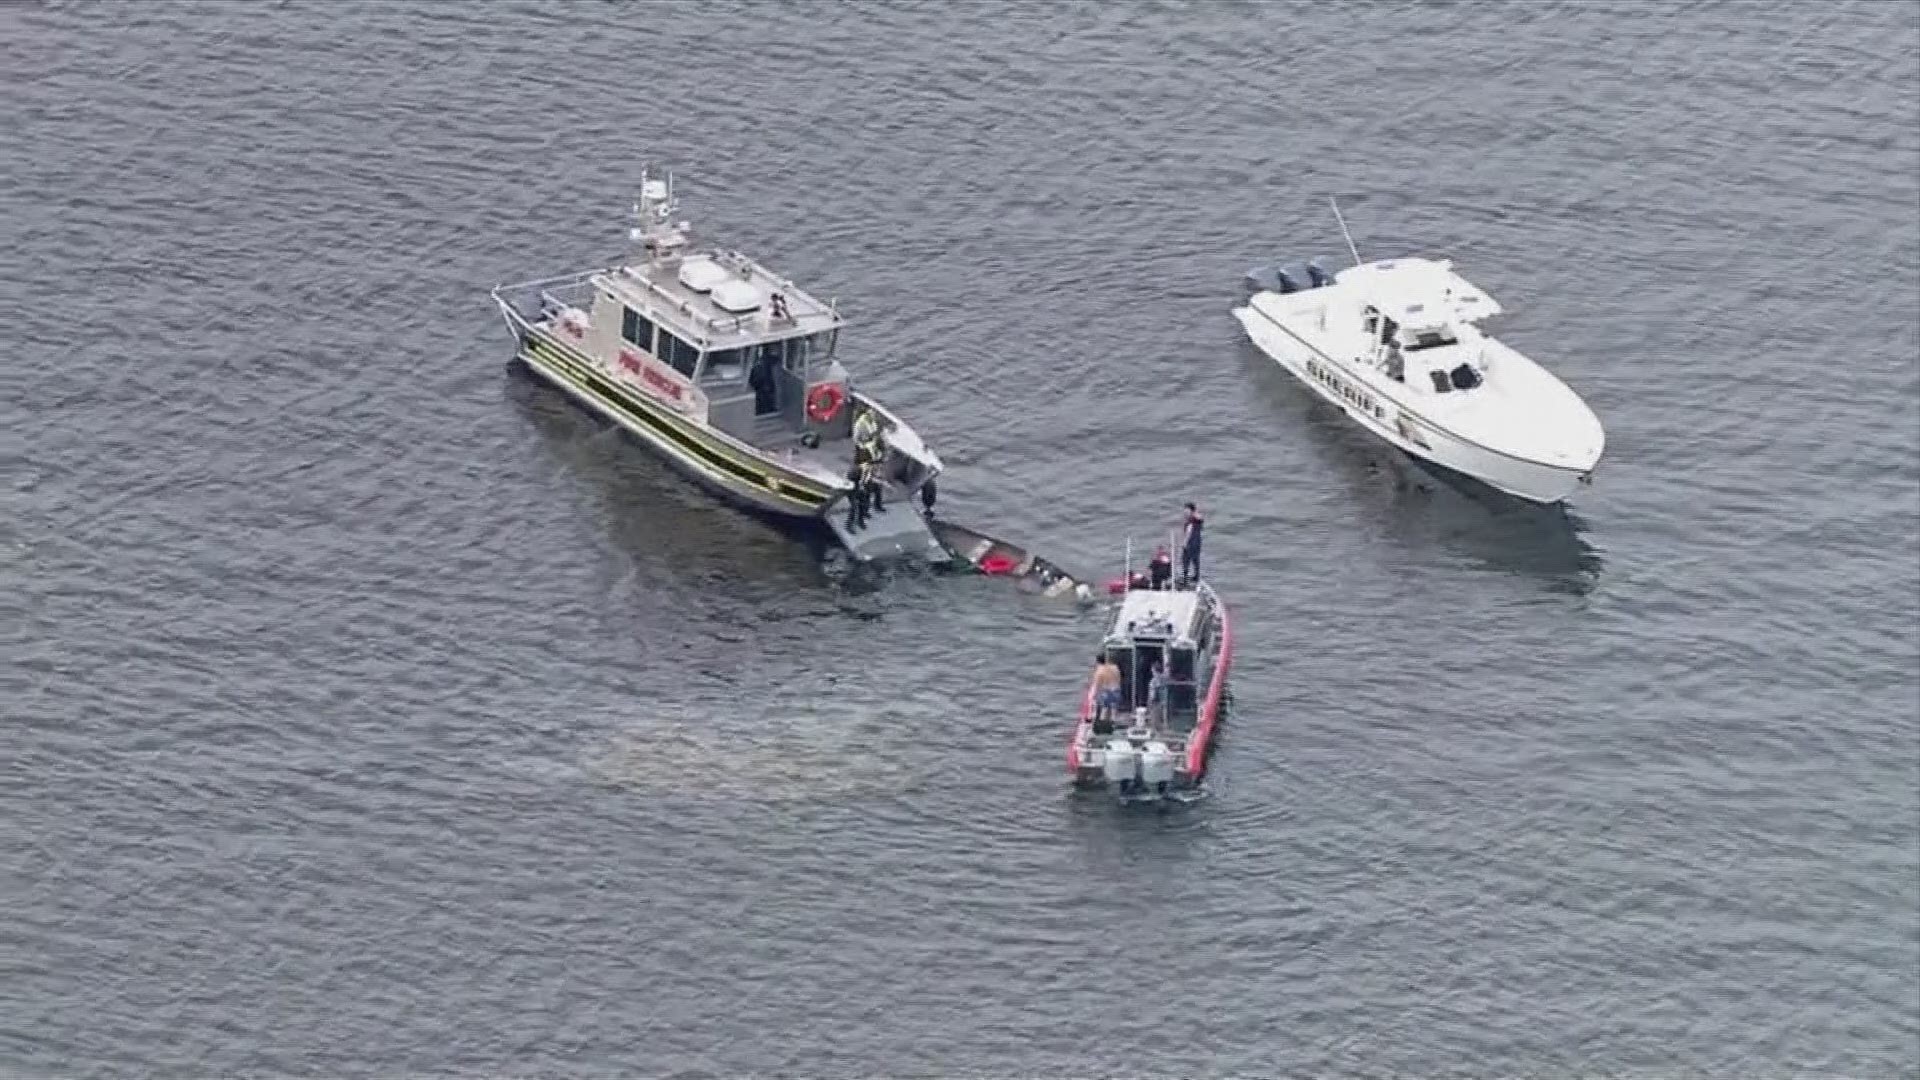 Two people had to be rescued Wednesday morning after their boat capsized east of Pine Key in Hillsborough County.